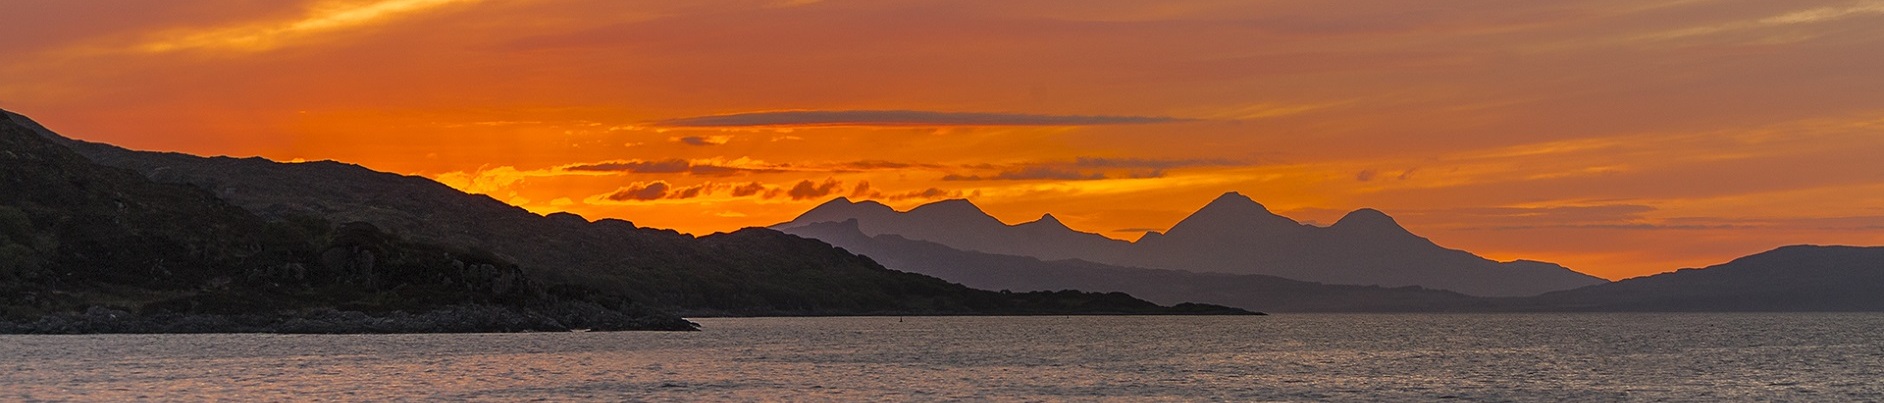 Sunset over the Isle of Rum